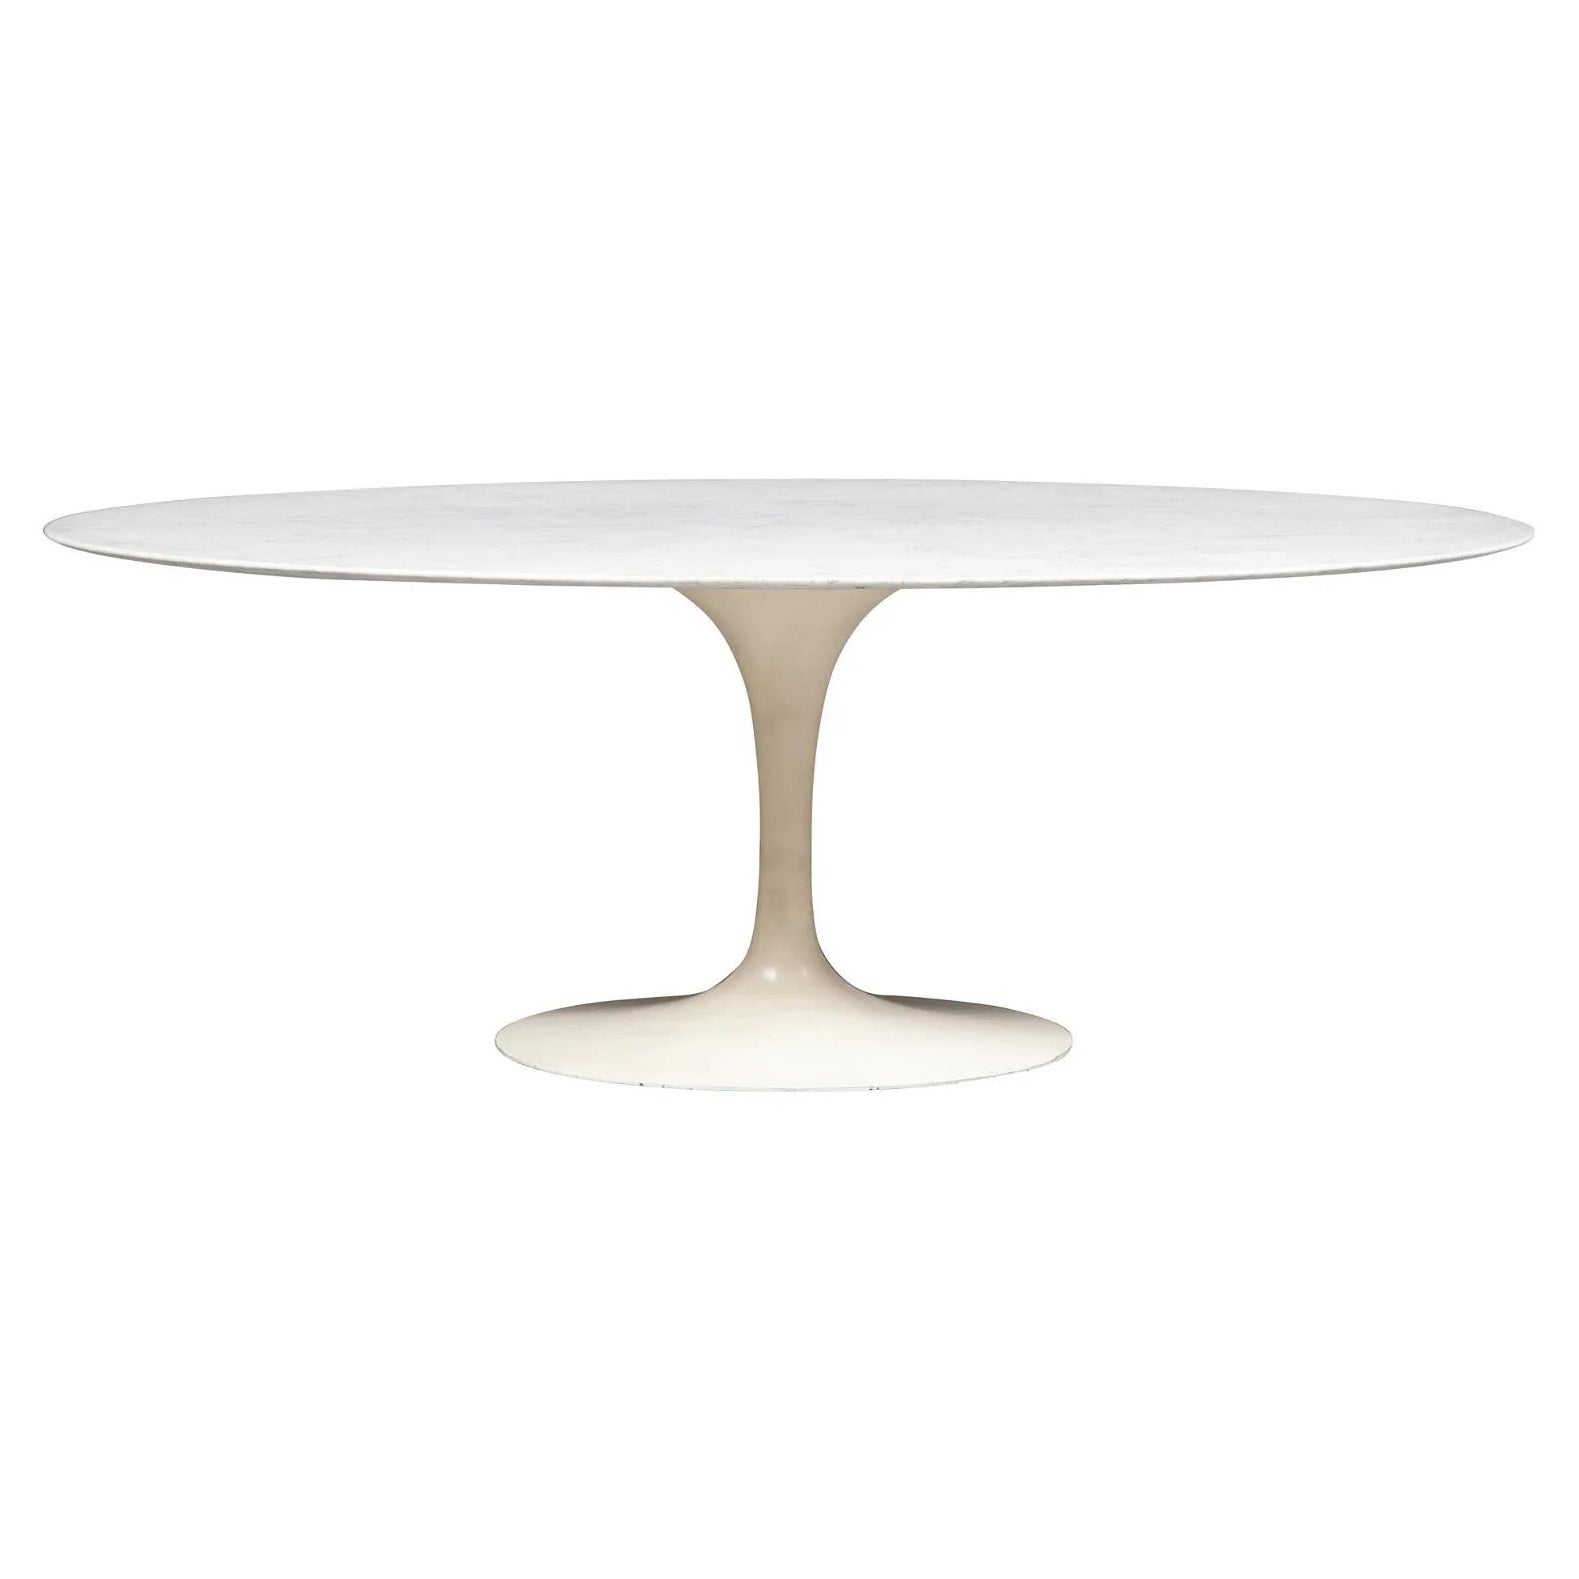 1960’s  Saarinen Oval Marble Top Dining Table for Knoll For Sale